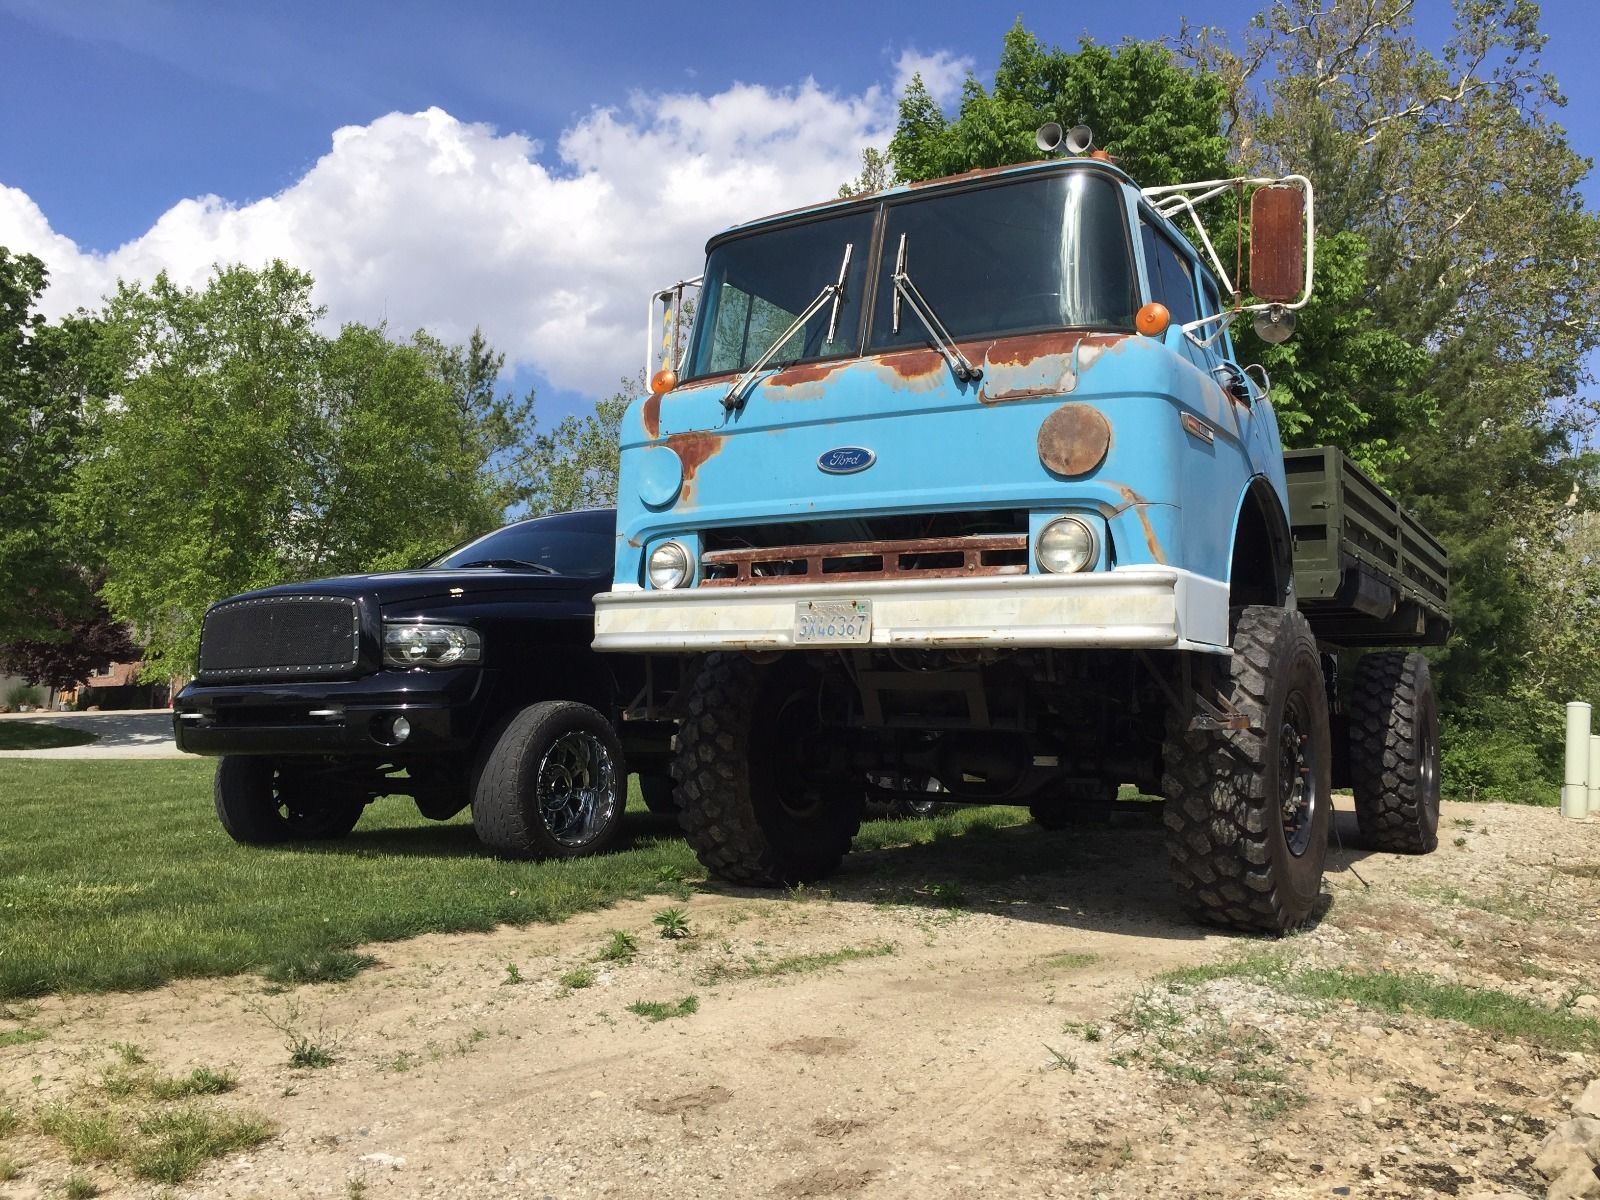 What Would You Use This 1989 Ford C8000 To Run Over? This Thing’s Unreal!